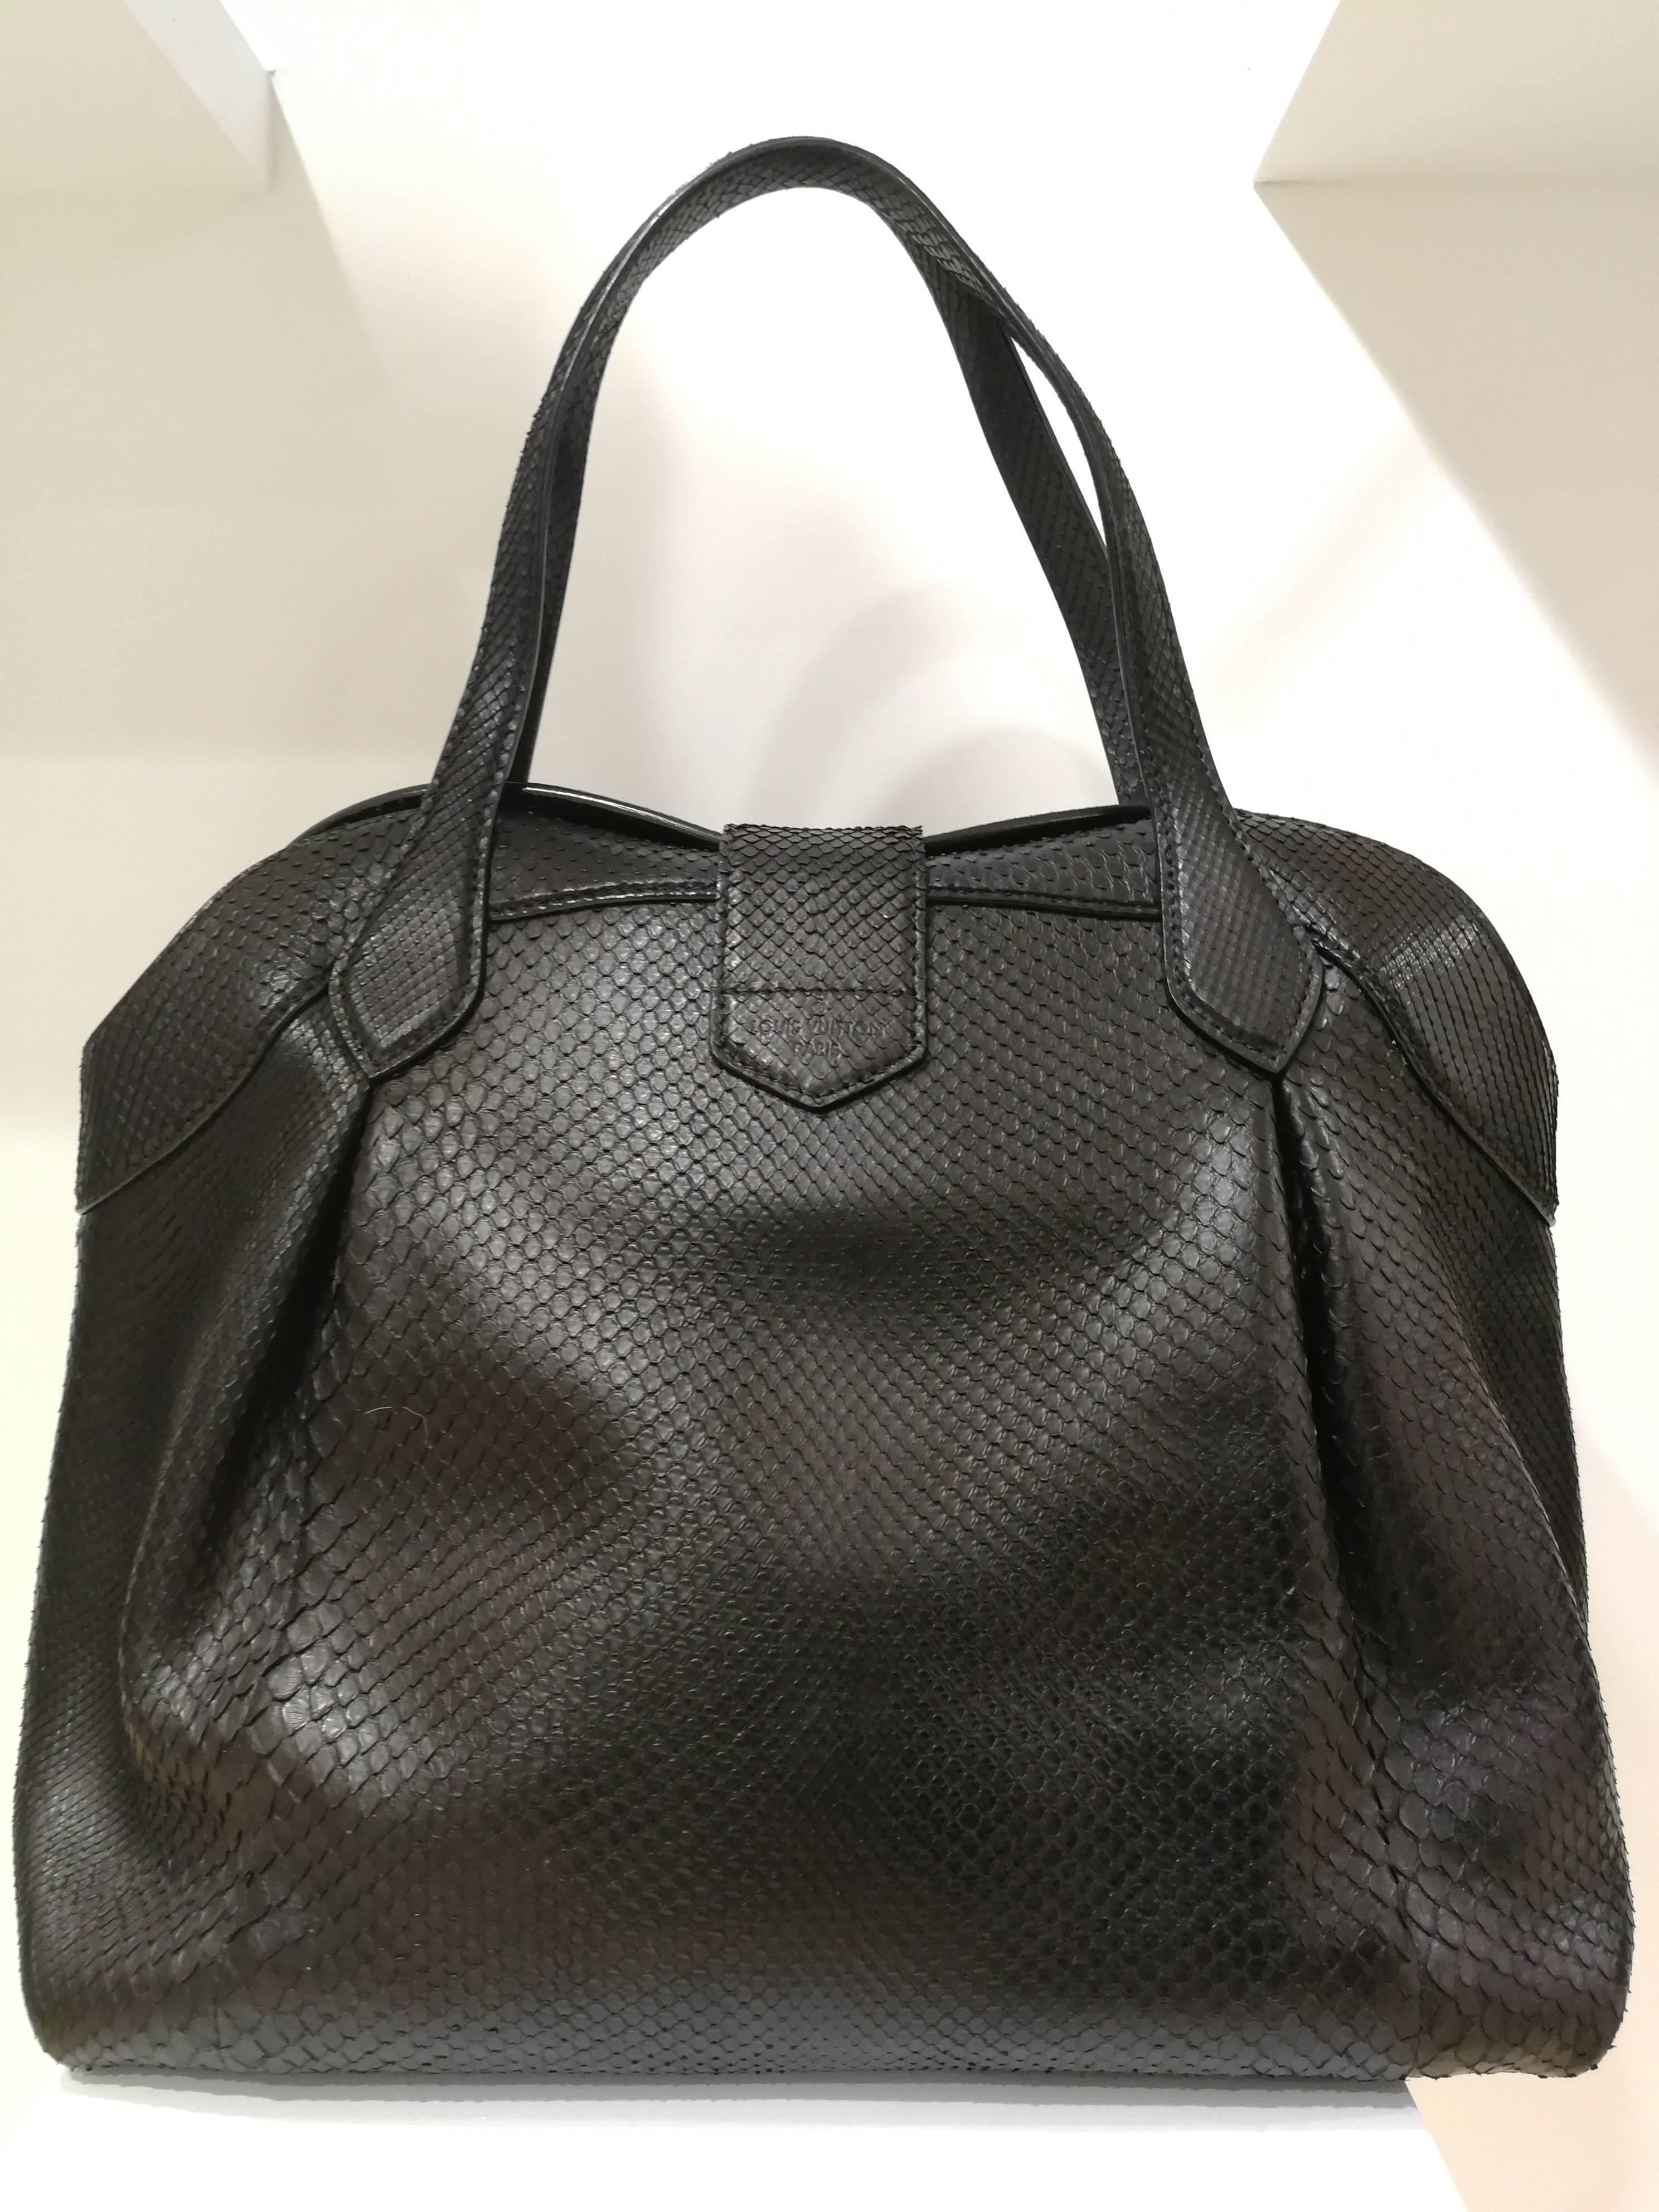 louis vuitton black bag with silver hardware